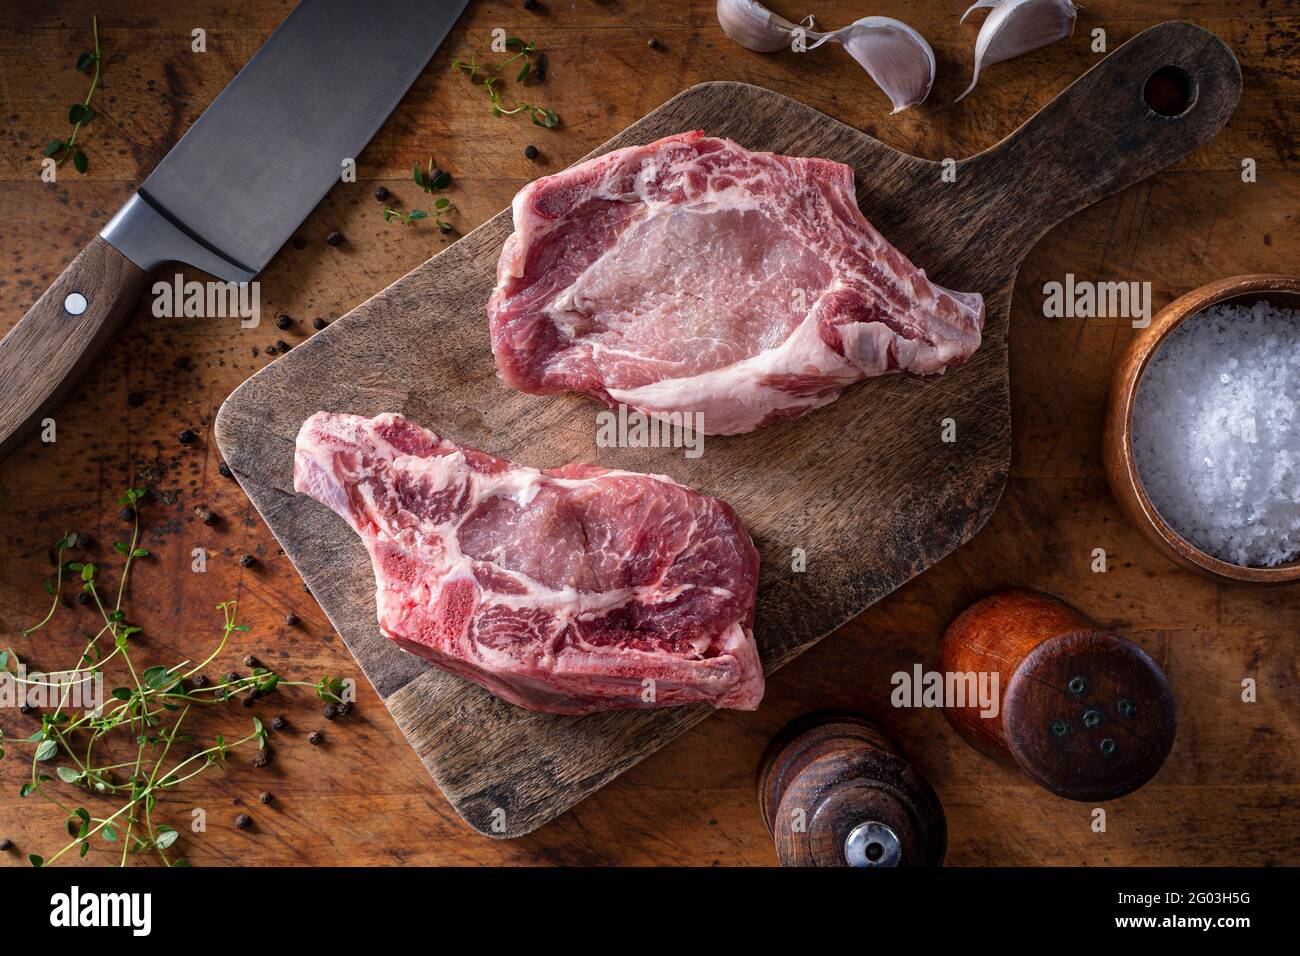 Raw organic pork chops on a rustic table top. Stock Photo